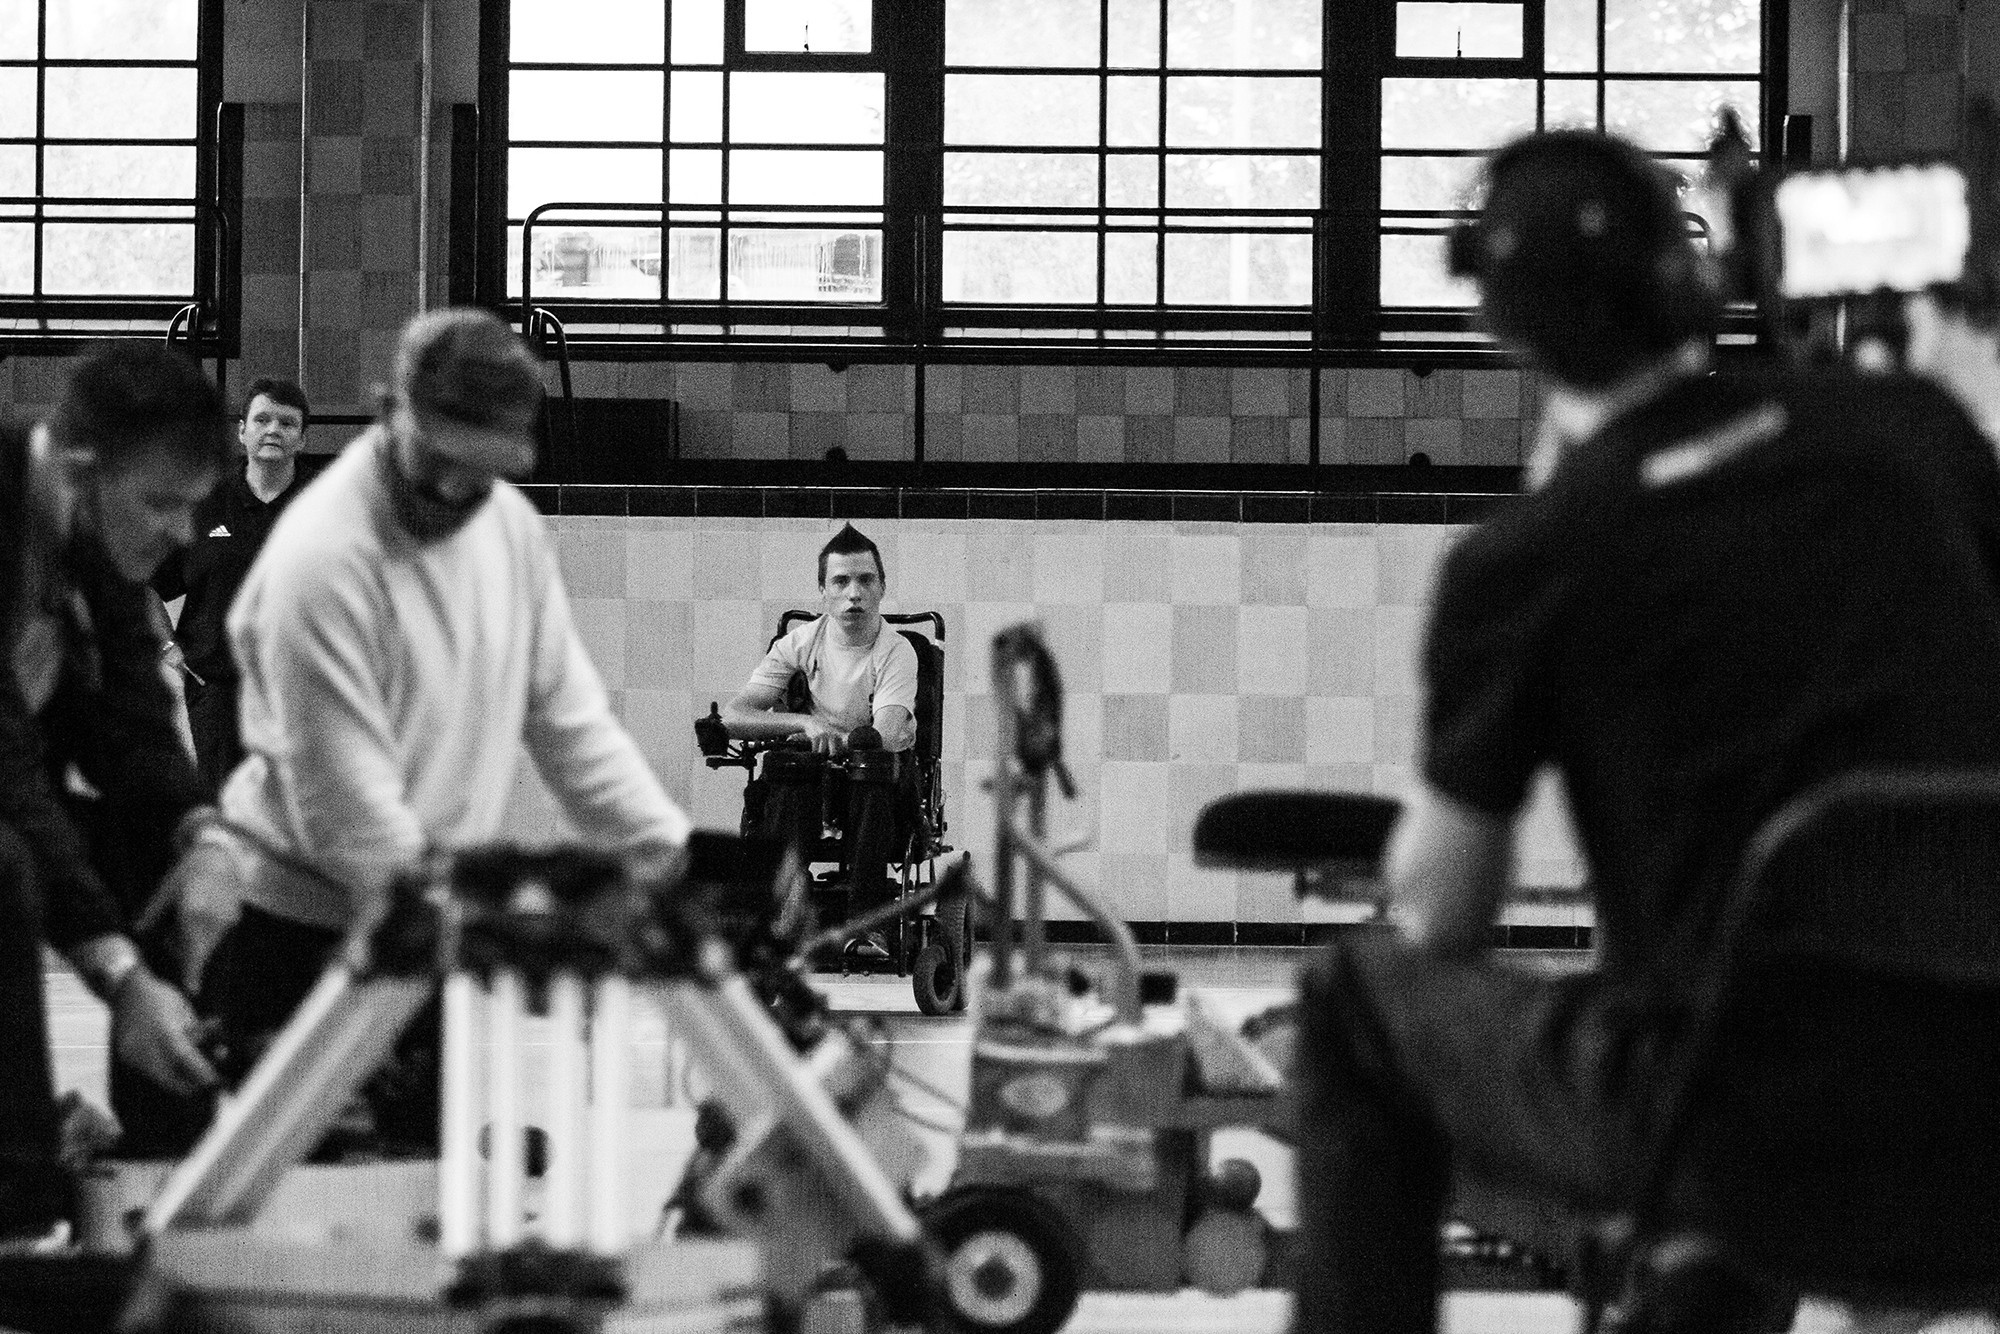 Boccia player David Smith features in the Channel 4 advertising campaign ©Channel 4/Ian Treherne